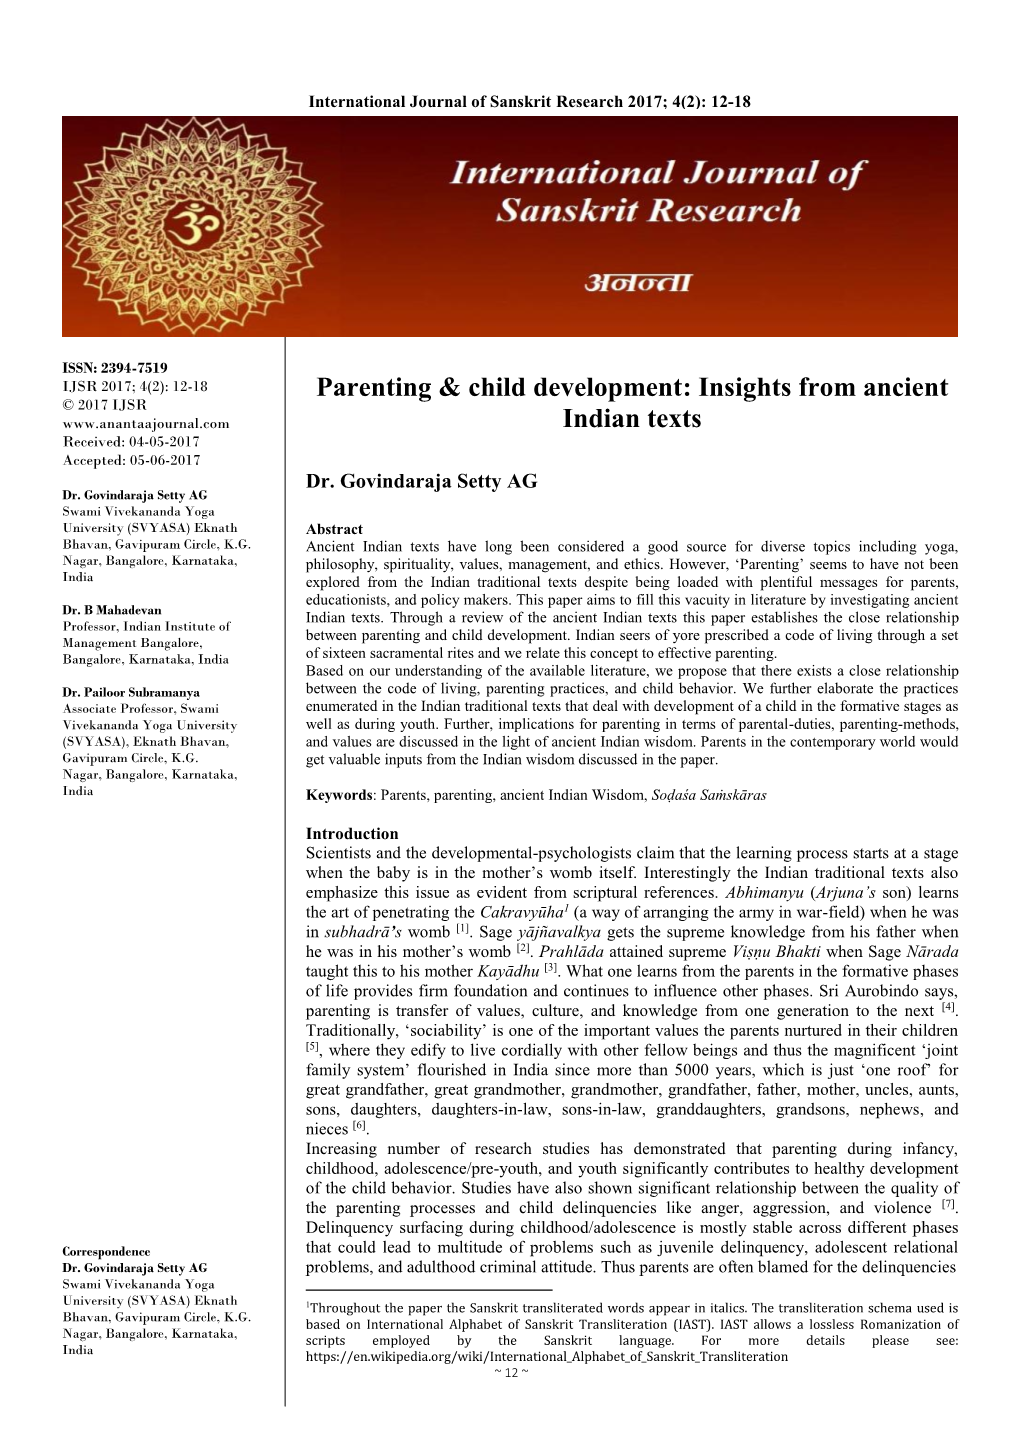 Parenting & Child Development: Insights from Ancient Indian Texts